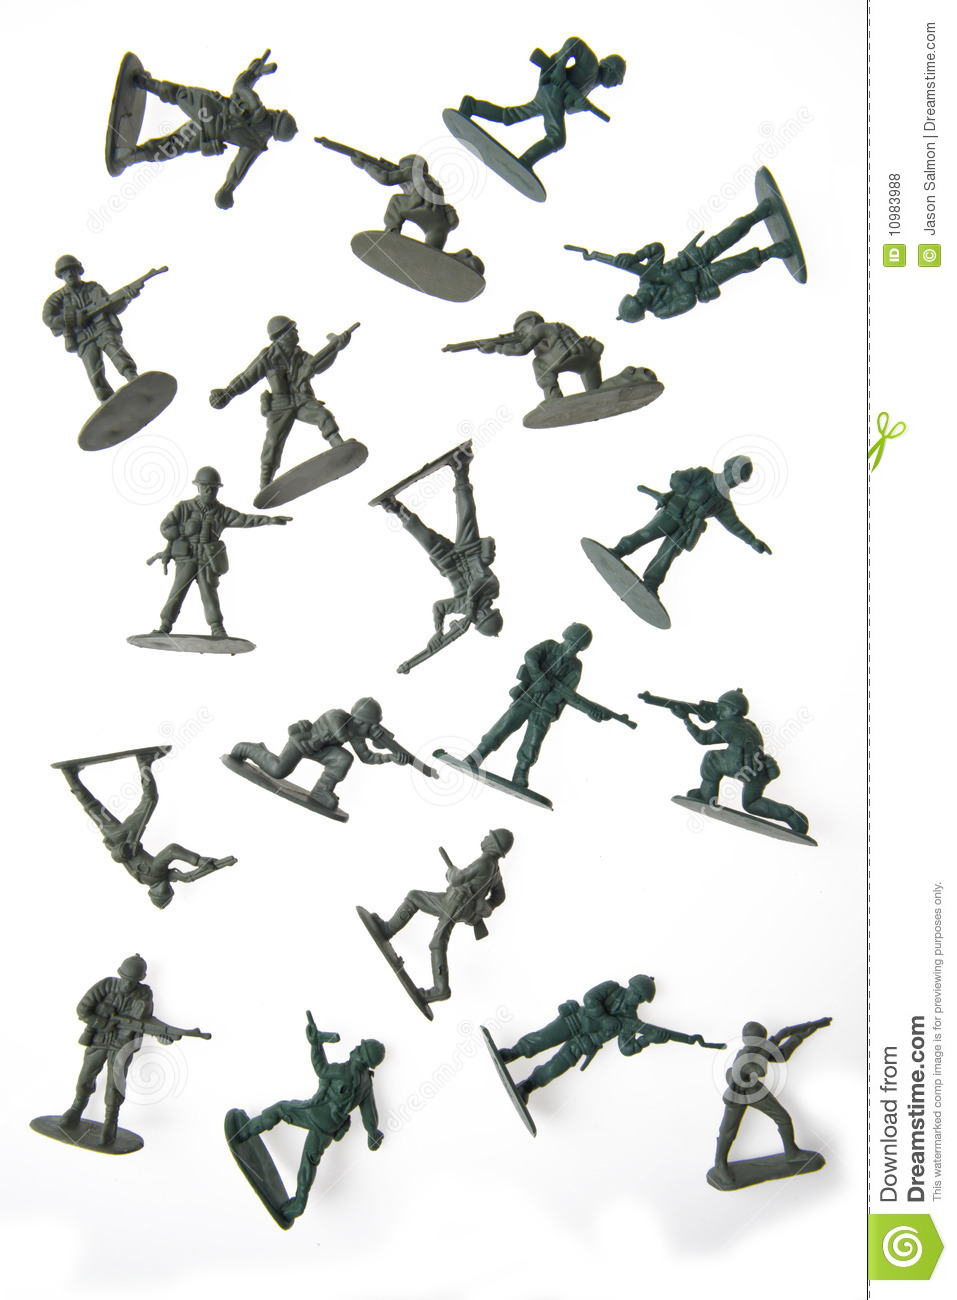 Toy Army Guy Clipart   Cliparthut   Free Clipart